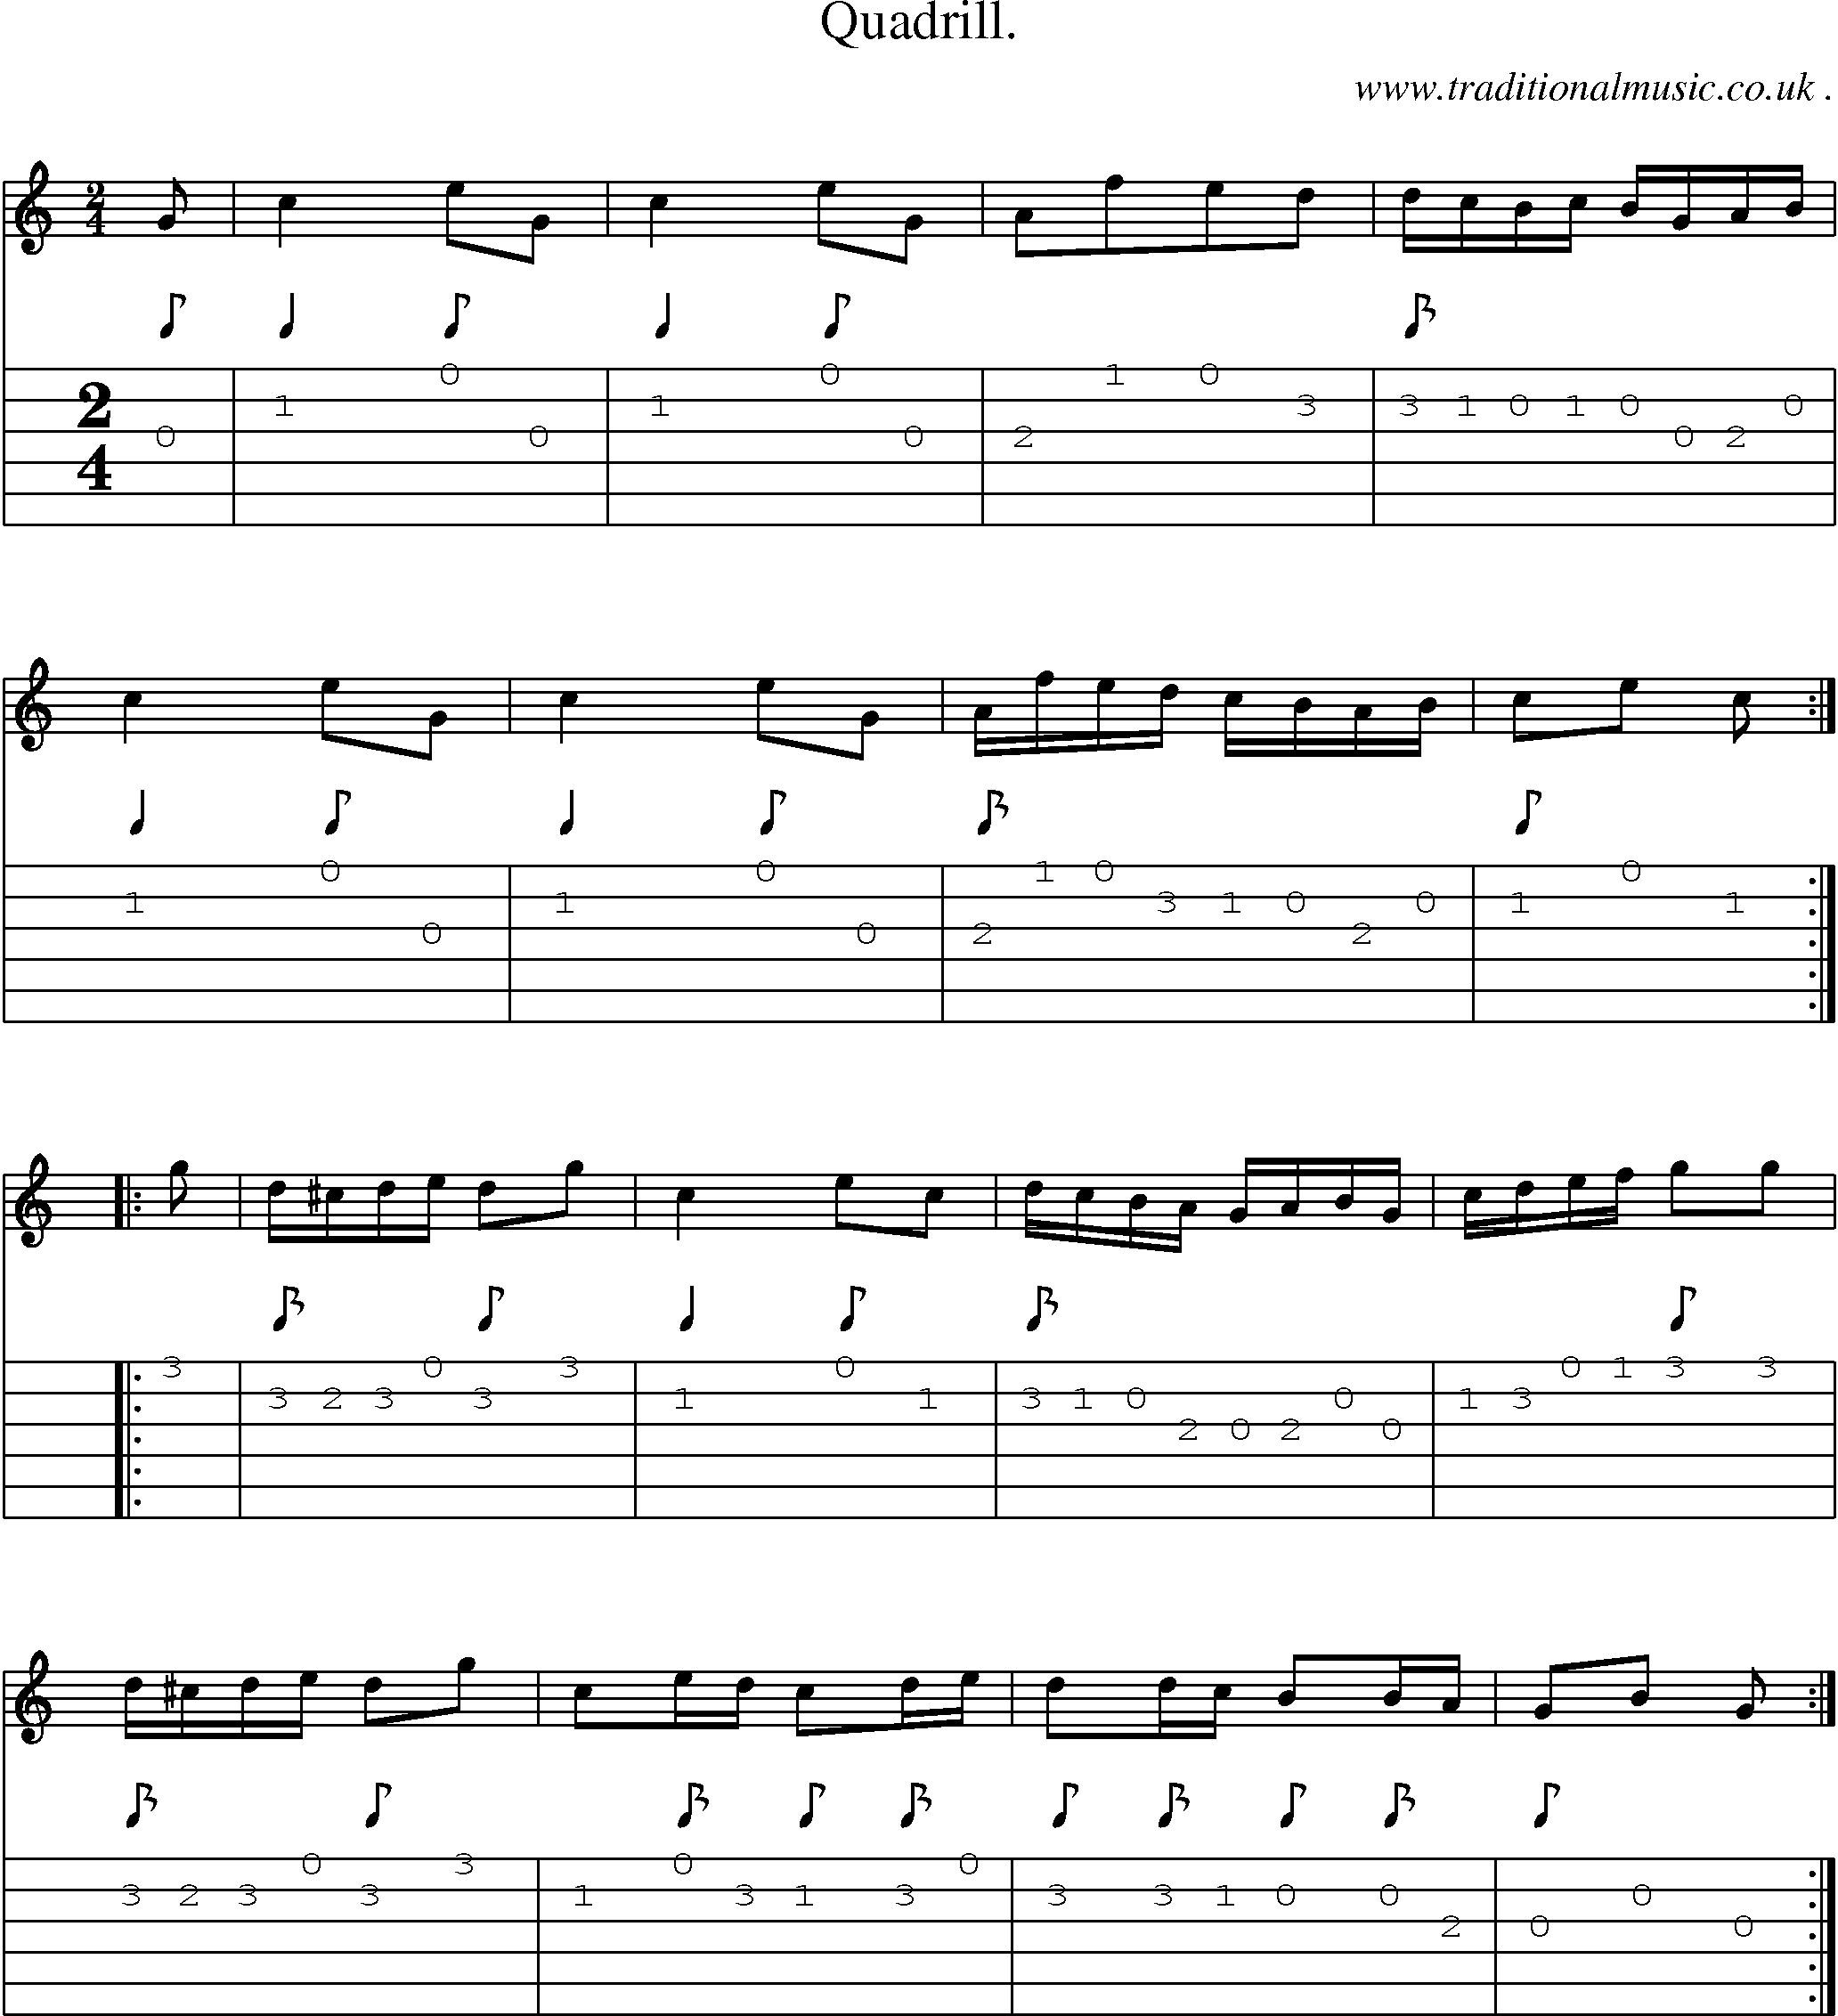 Sheet-Music and Guitar Tabs for Quadrill